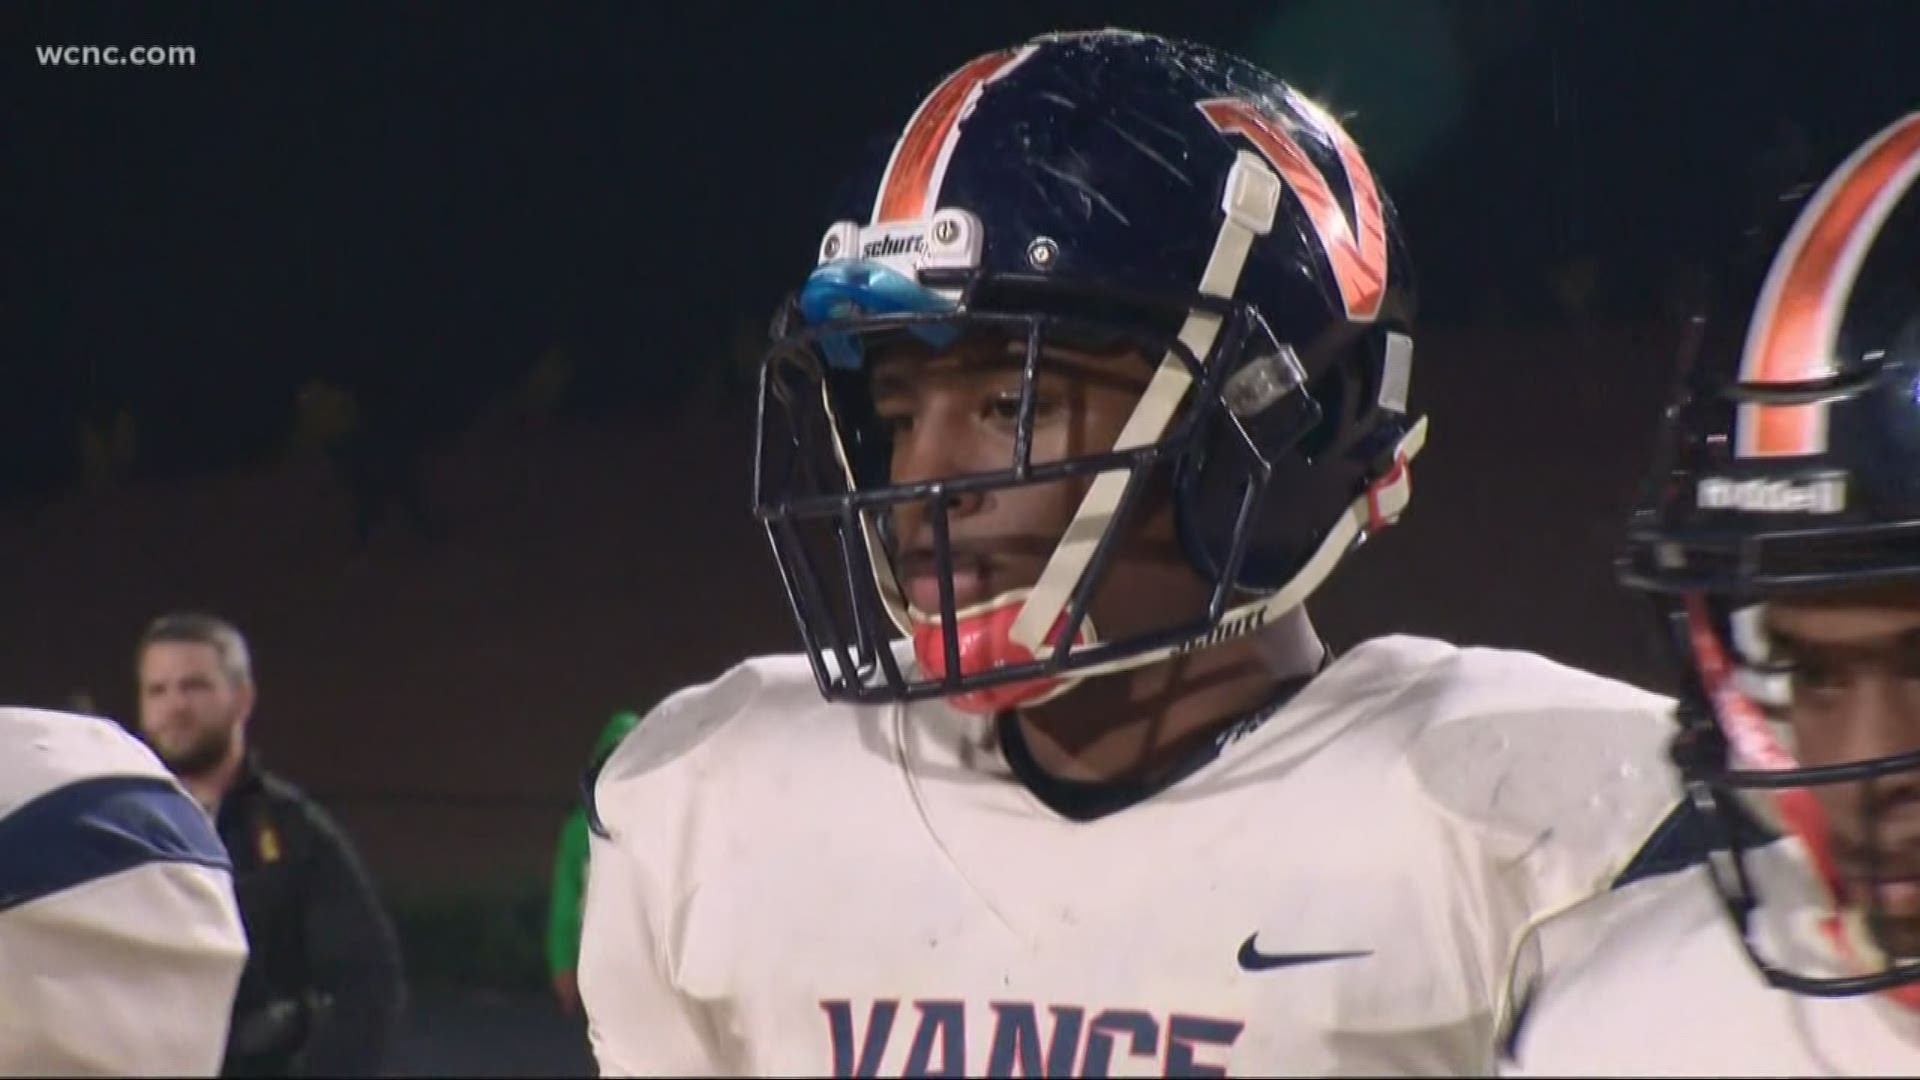 Echols is a four-star rated prospect who led Vance to their first state title game as a junior.